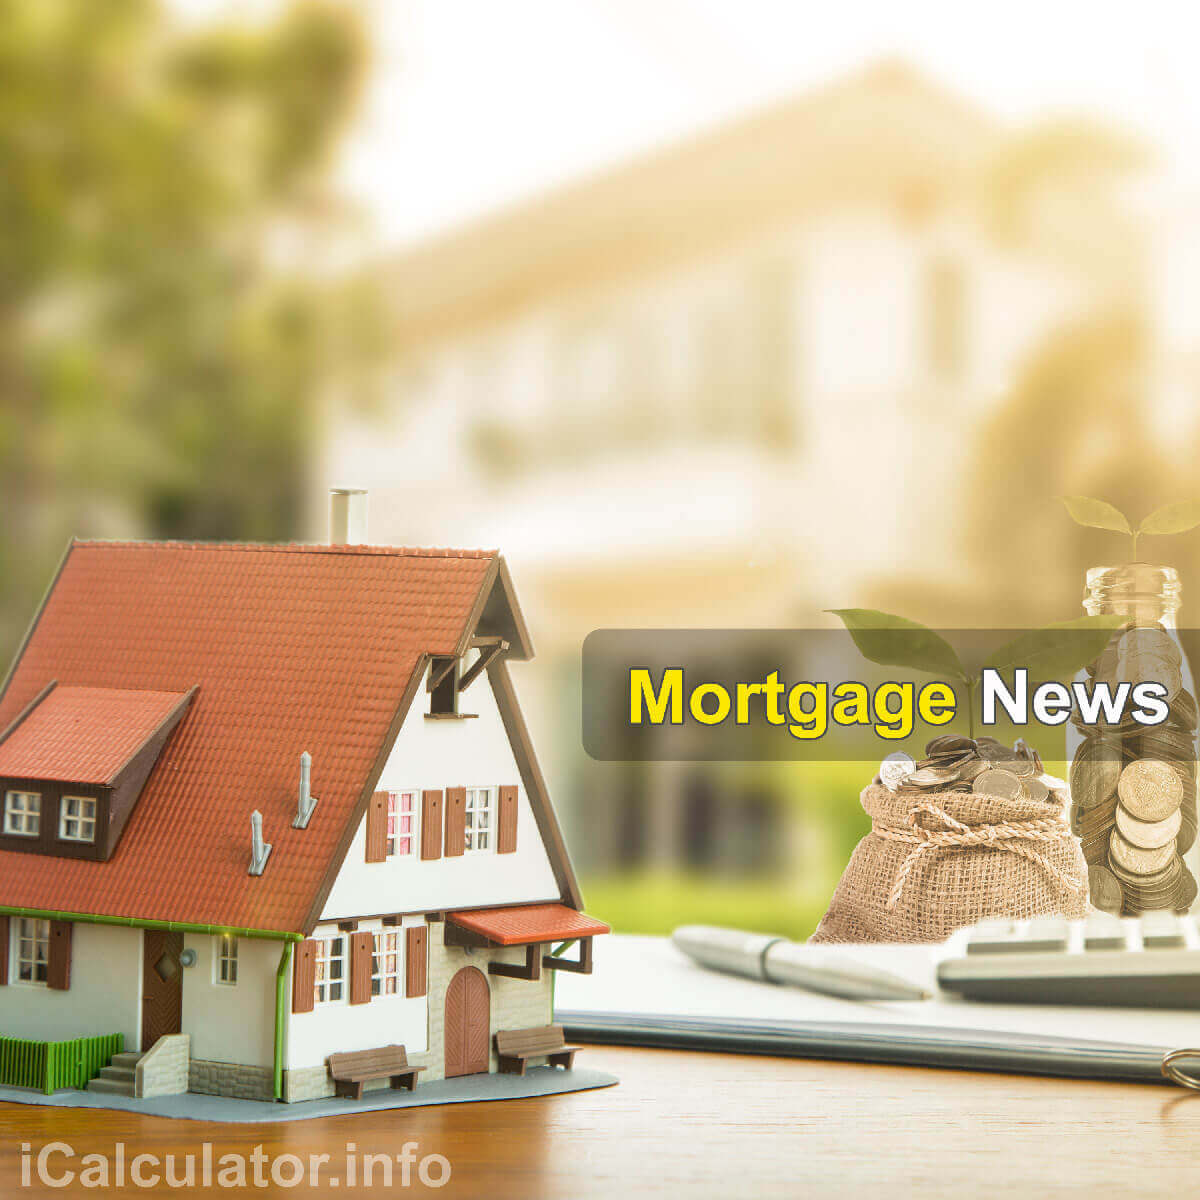 UK Mortgage News. Could stamp duty reform be a win for individuals and the UK Economy? In this tax news update we look at the boost that stamp duty tax reform could deliver to the UK and the positive impact for all.